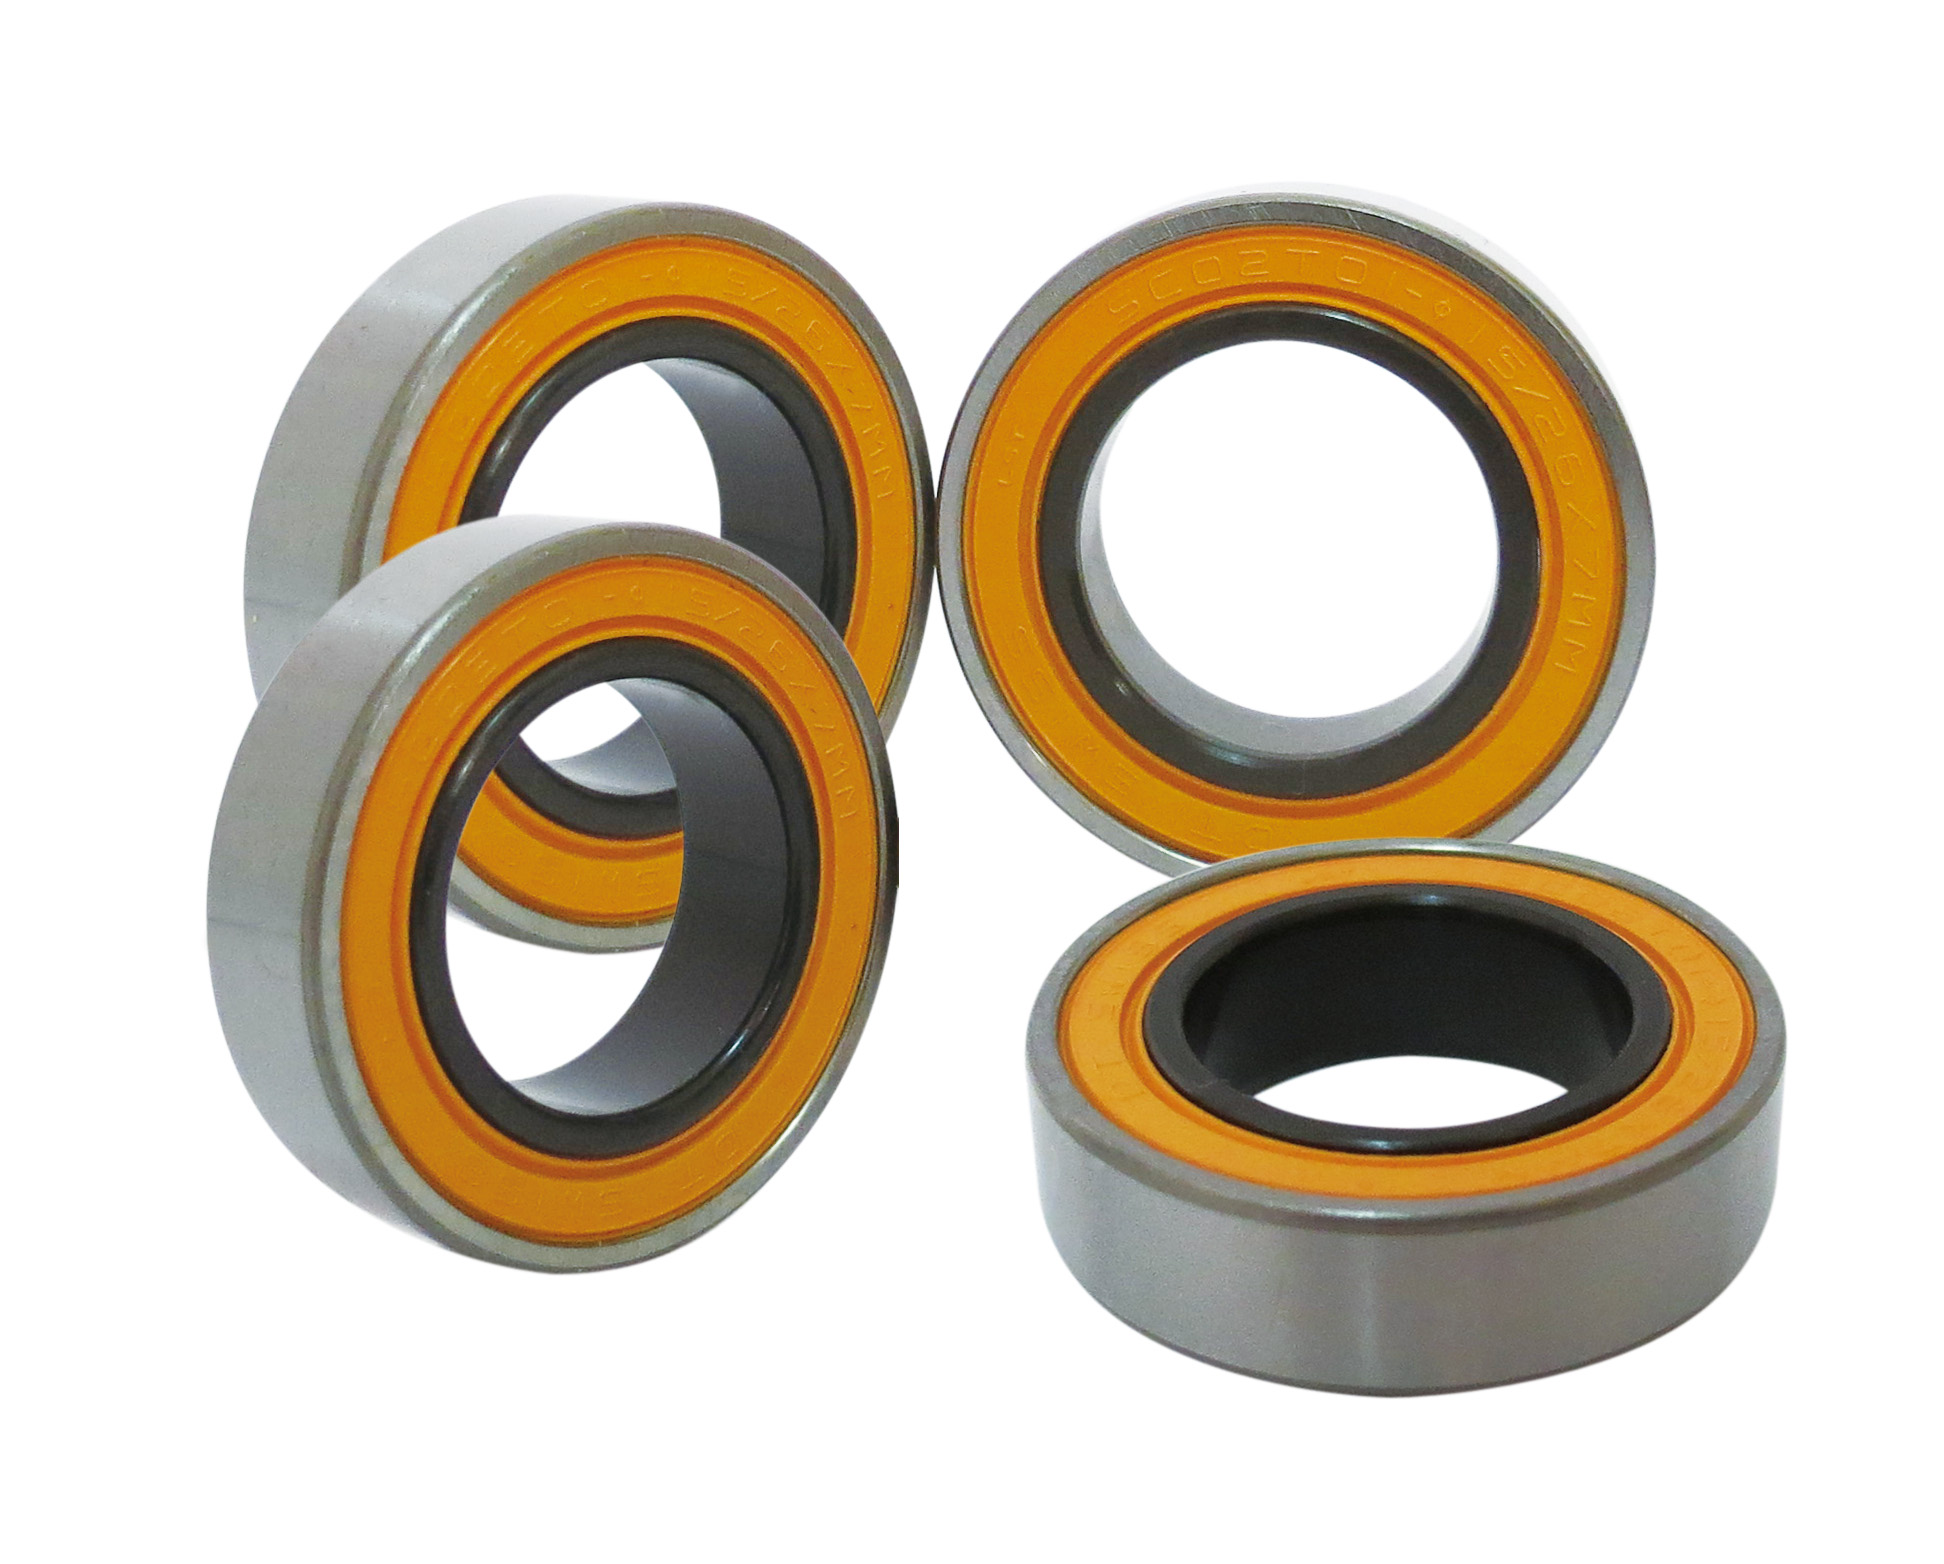 Combined Ceramic Bearings for Bicycle Hubs